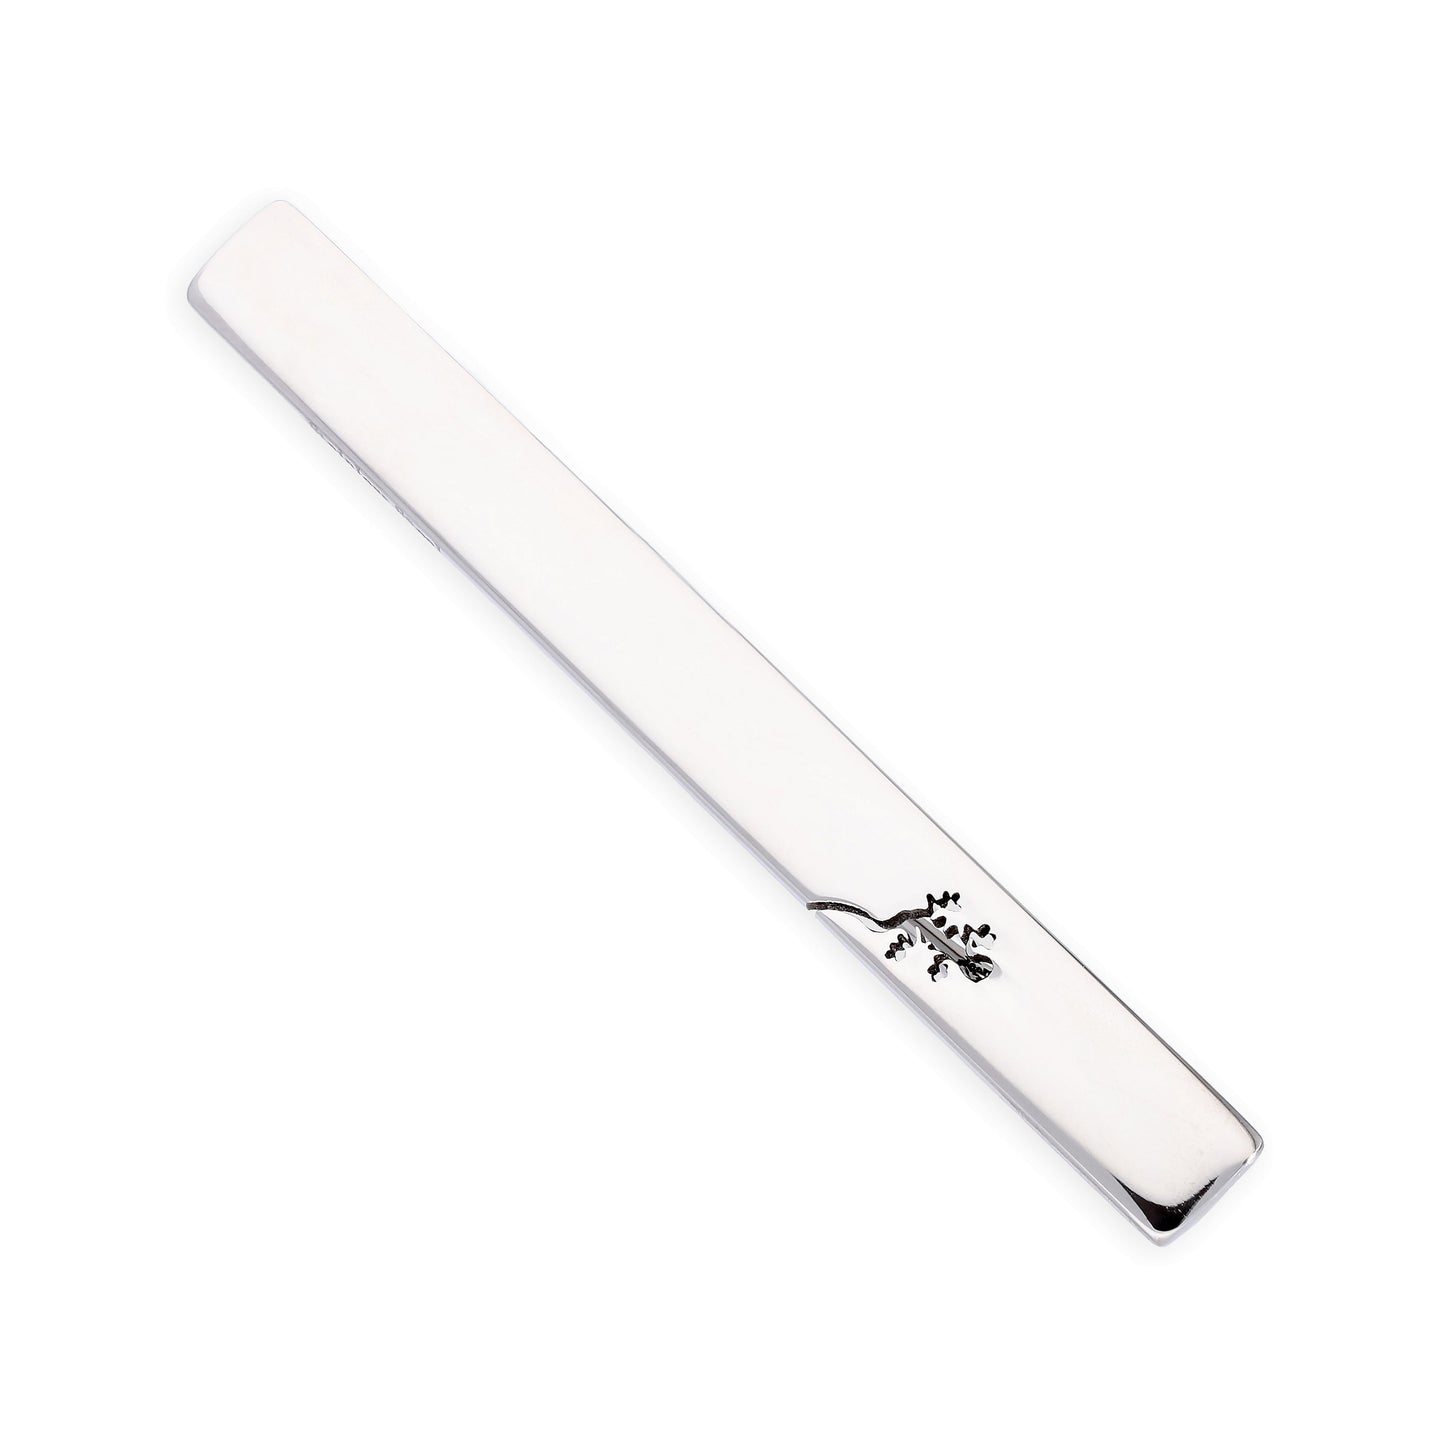 Stainless Steel Tie Slide with Gecko Engraving